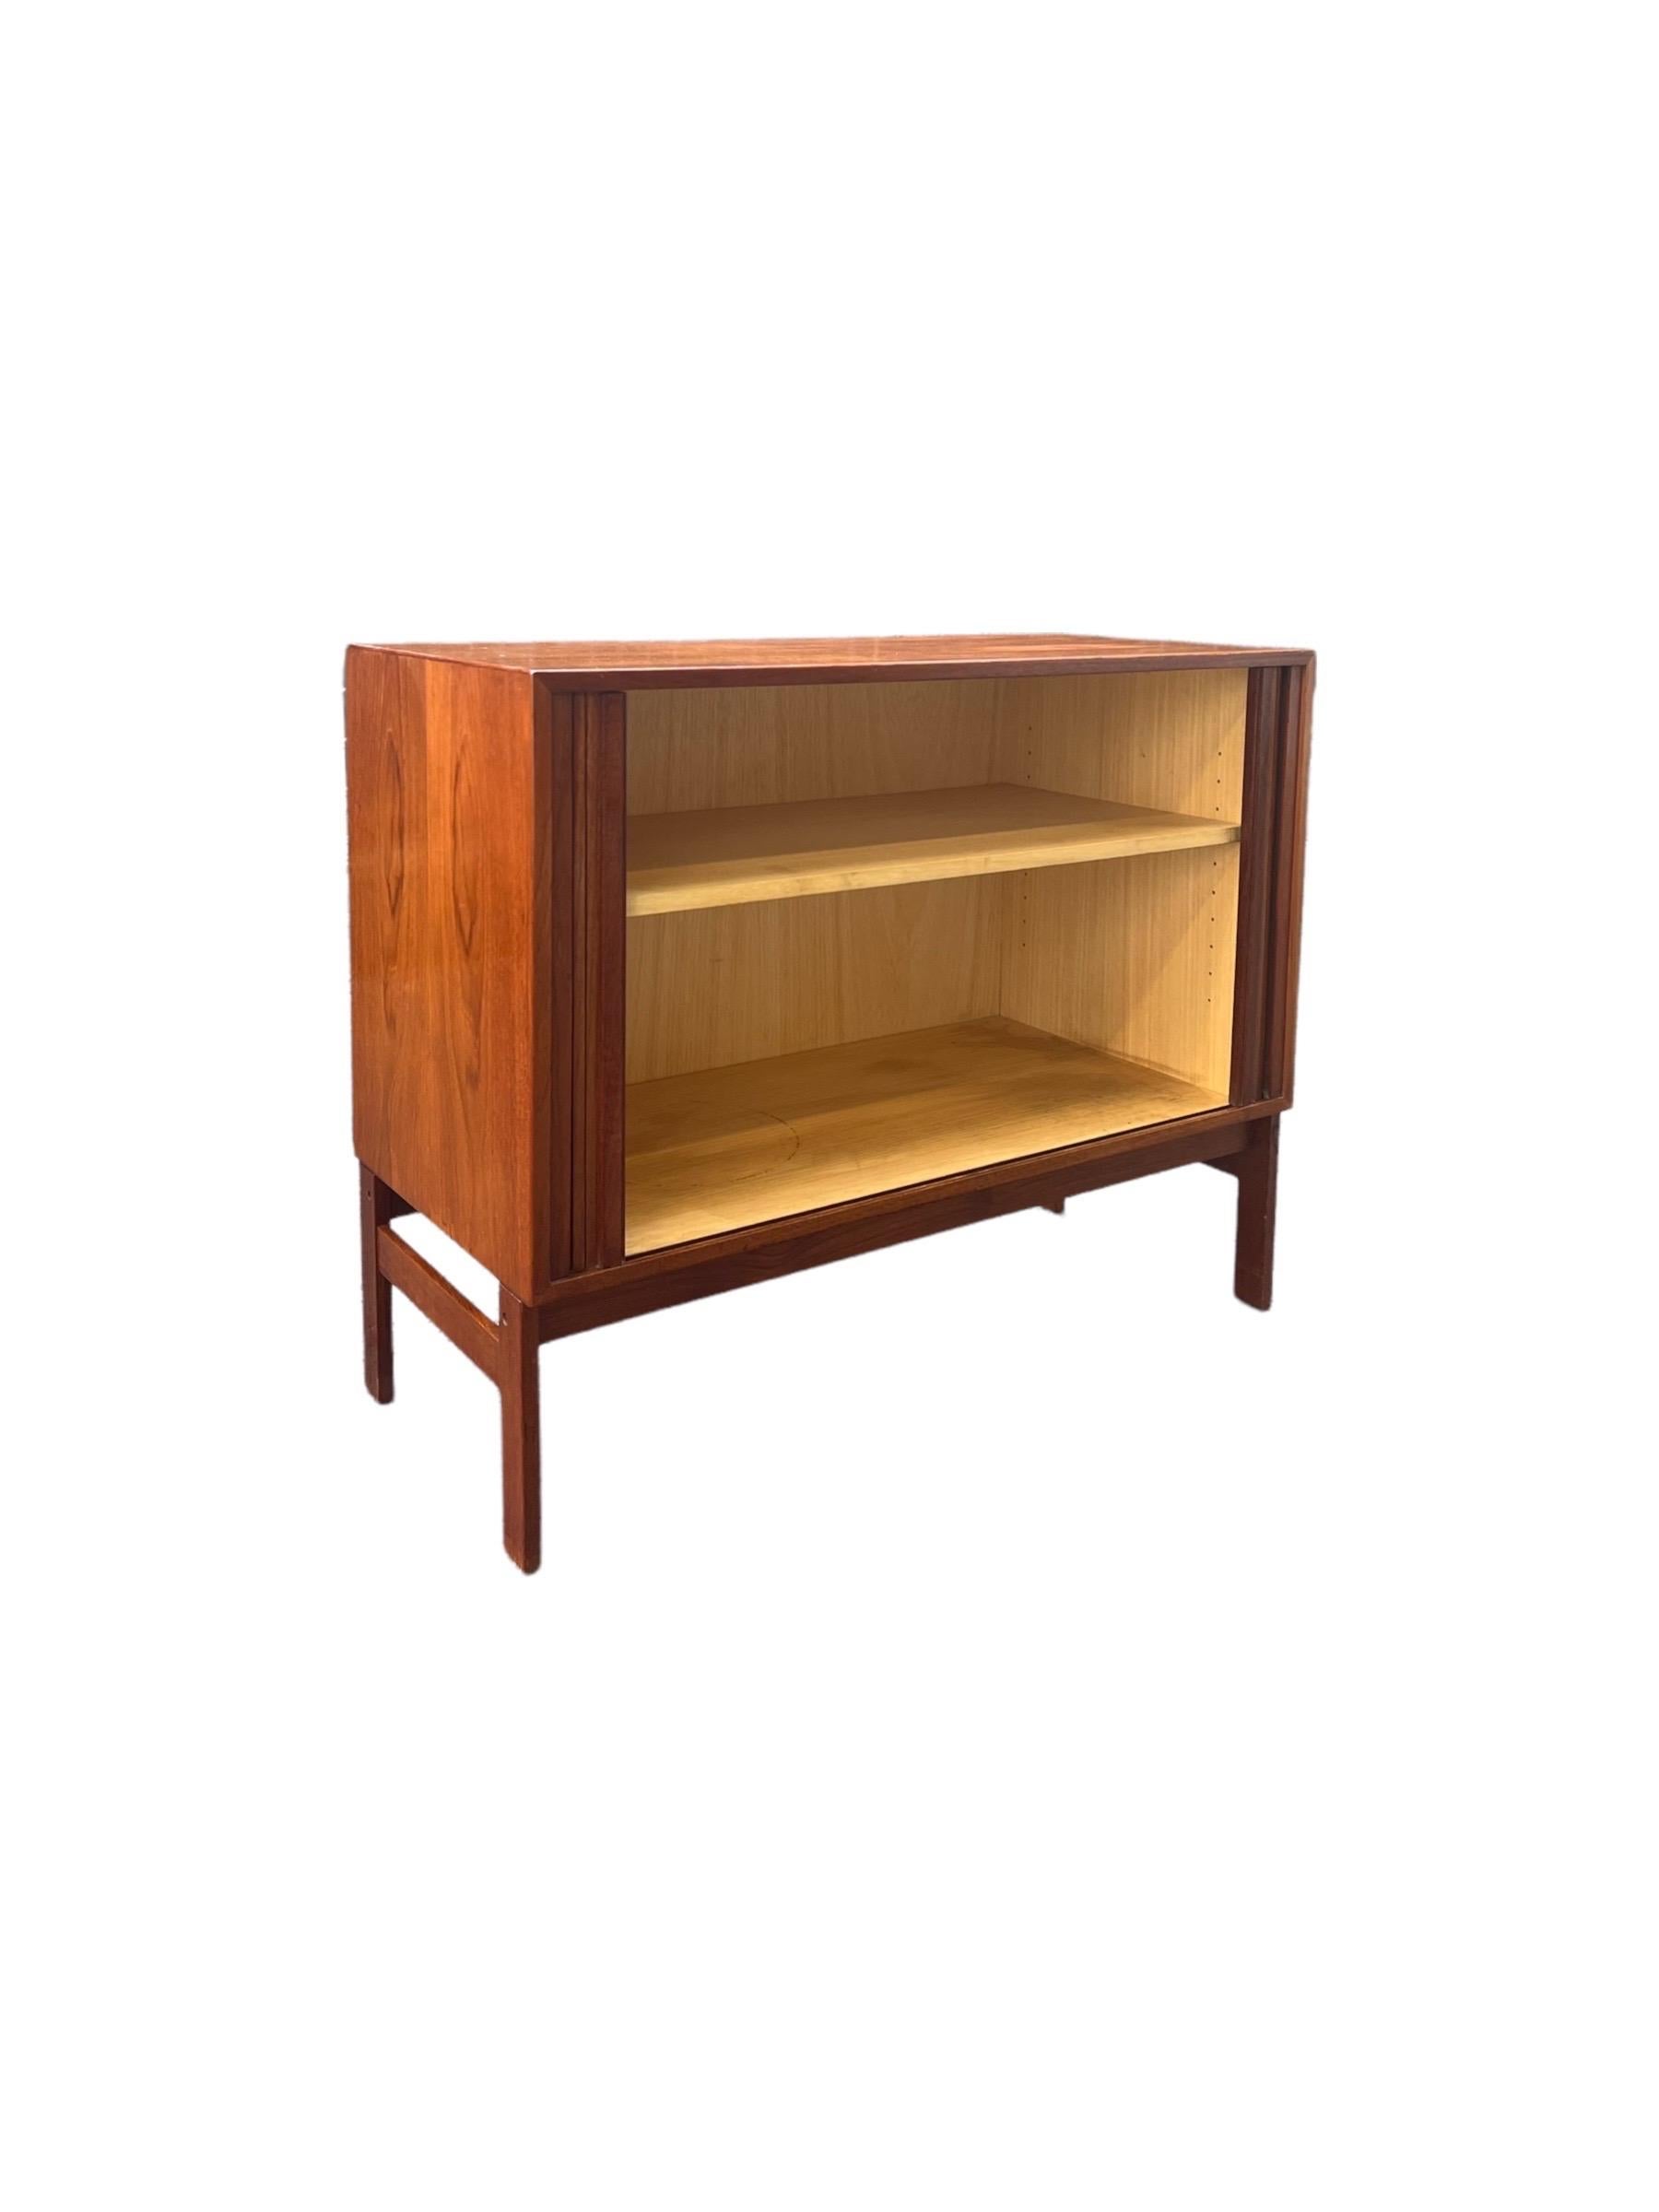 Vintage Danish Modern Tambour Door Record Cabinet of Credenza Imported For Sale 2